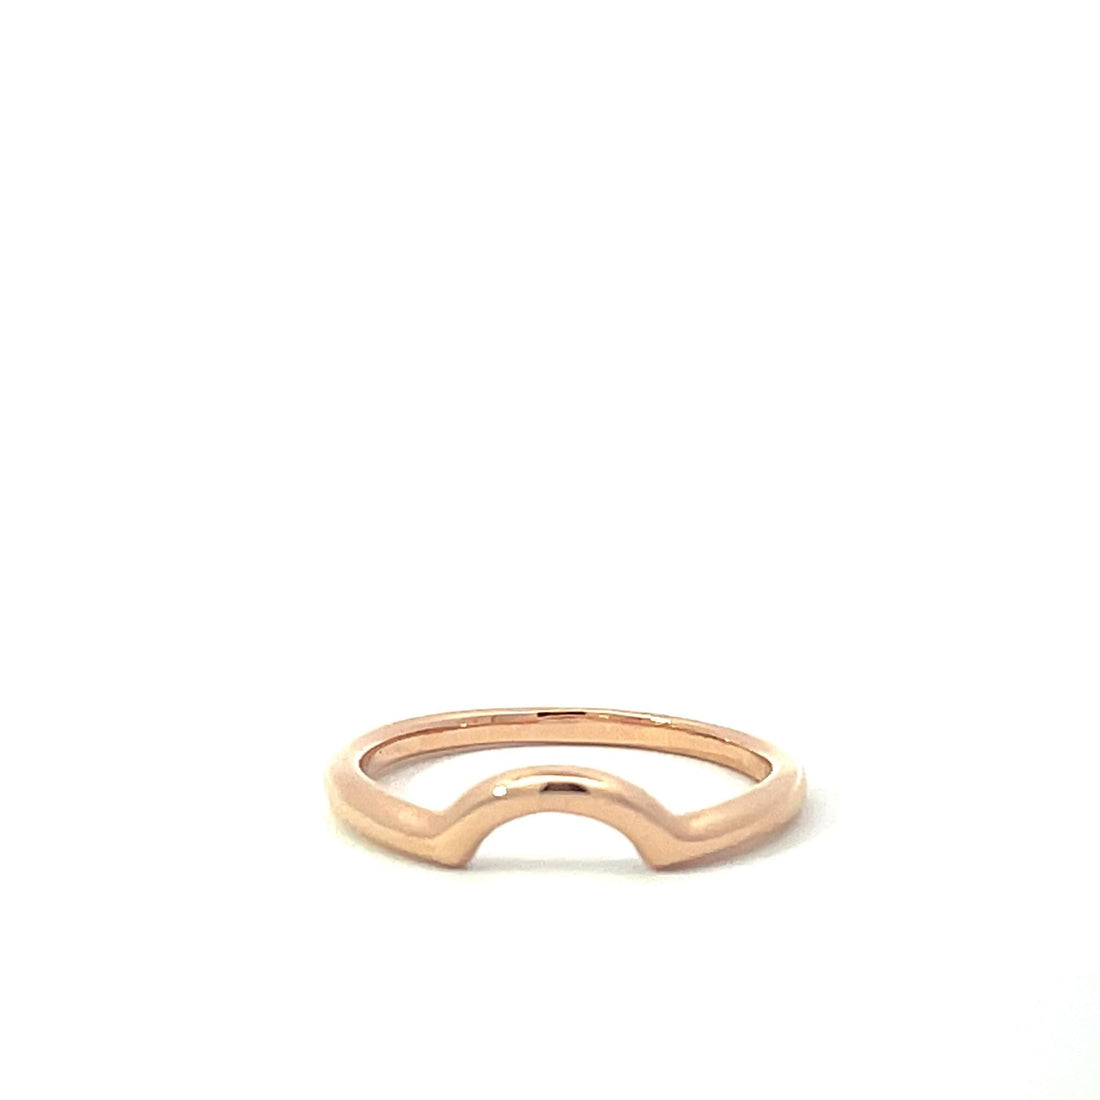 14kt Gold Contour Band - Skeie's Jewelers